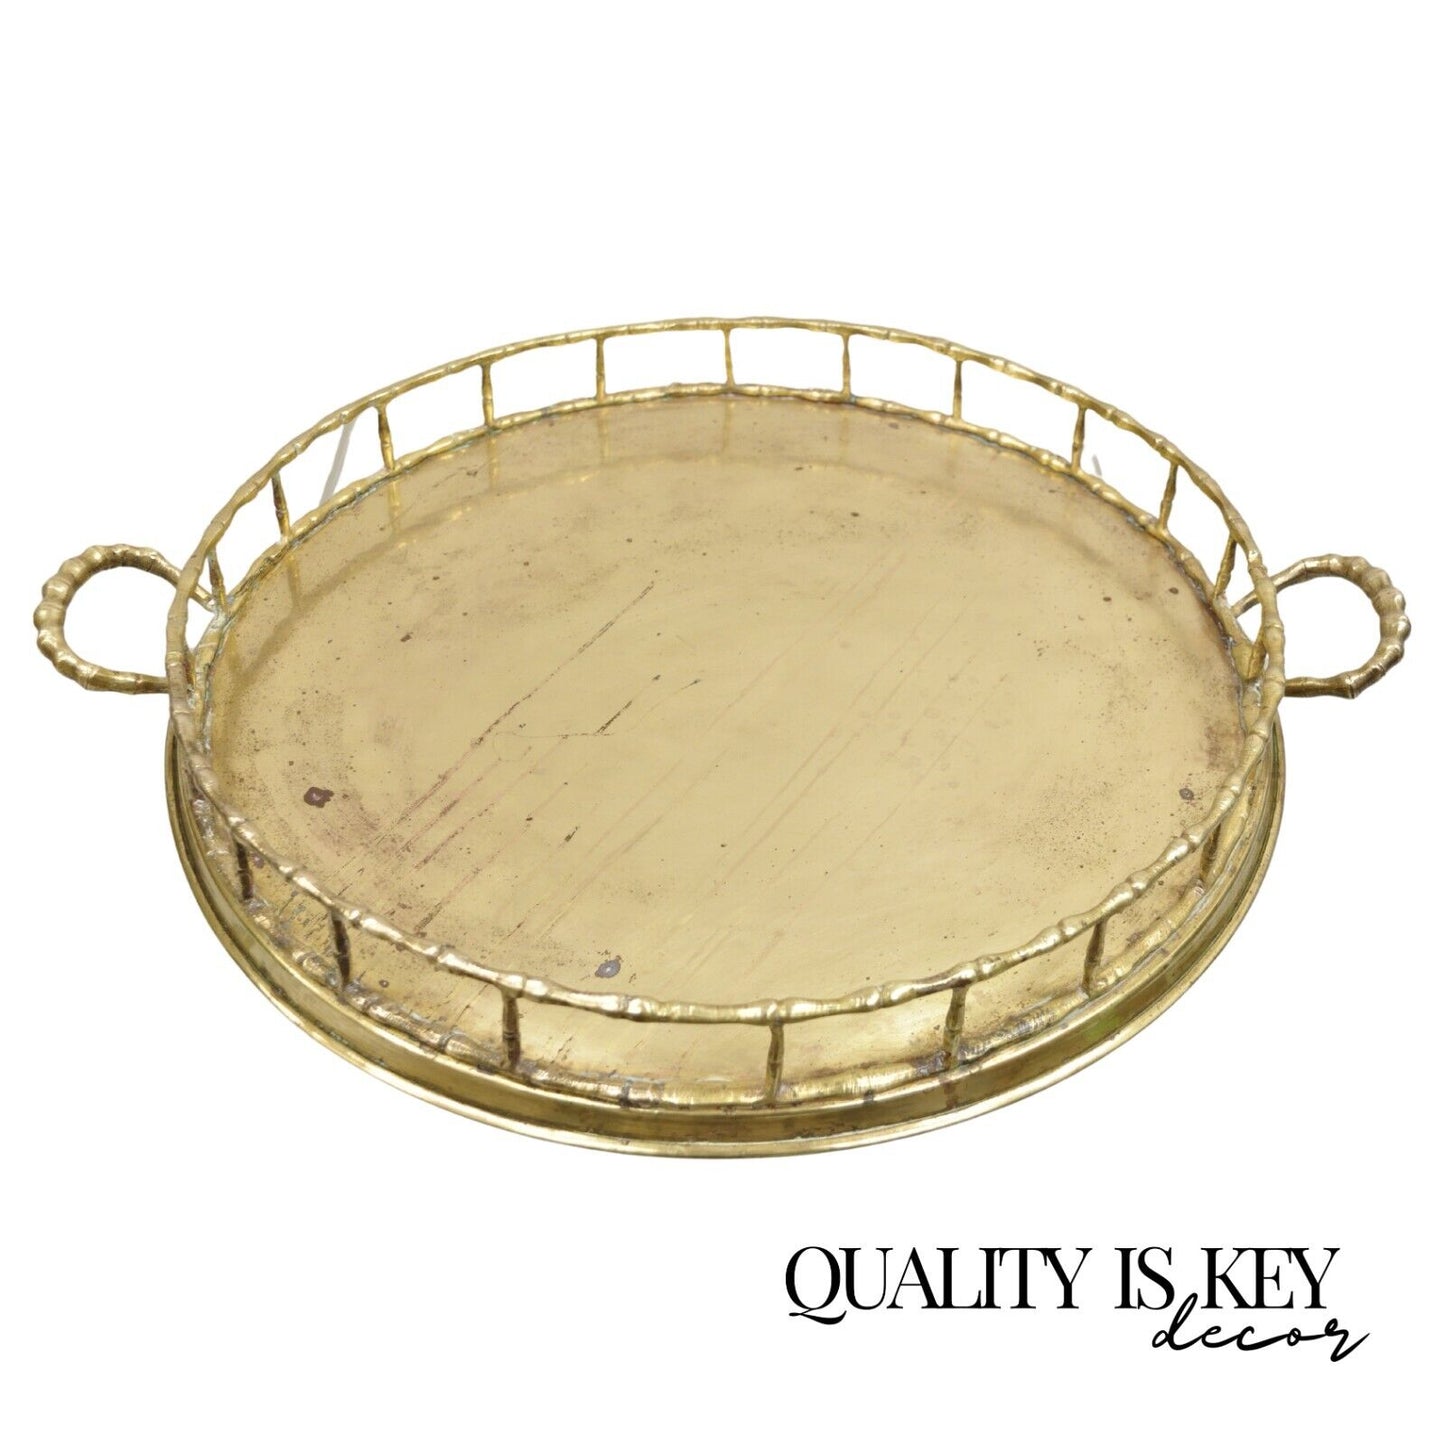 Vintage Hollywood Regency Faux Bamboo Solid Brass Round Serving Platter Tray